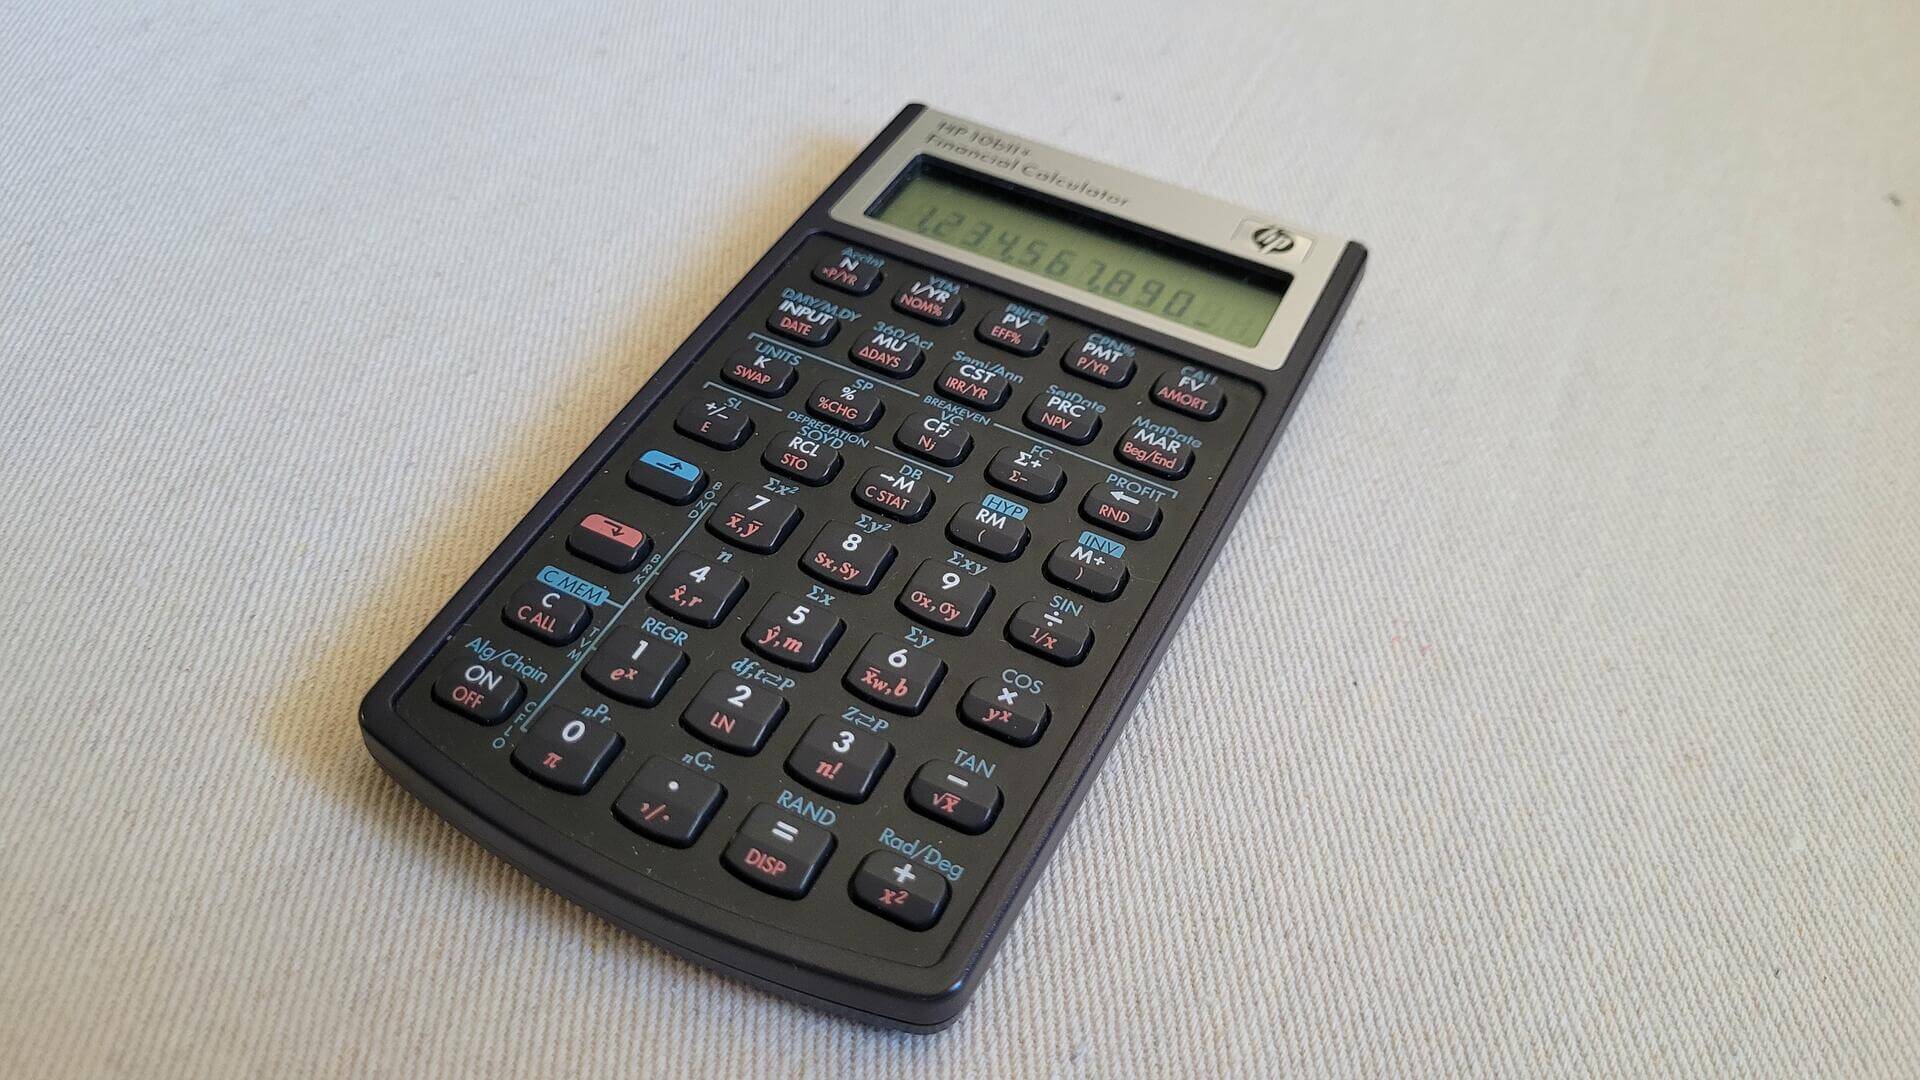 HP 10BII financial calculator makes it easy to solve business, finance, accounting, real estate, and banking to mathematics, science and statistics, and math calculations accurately and quickly. Features a 12-character, seven-segment screen display for clear and easy-to-read results.